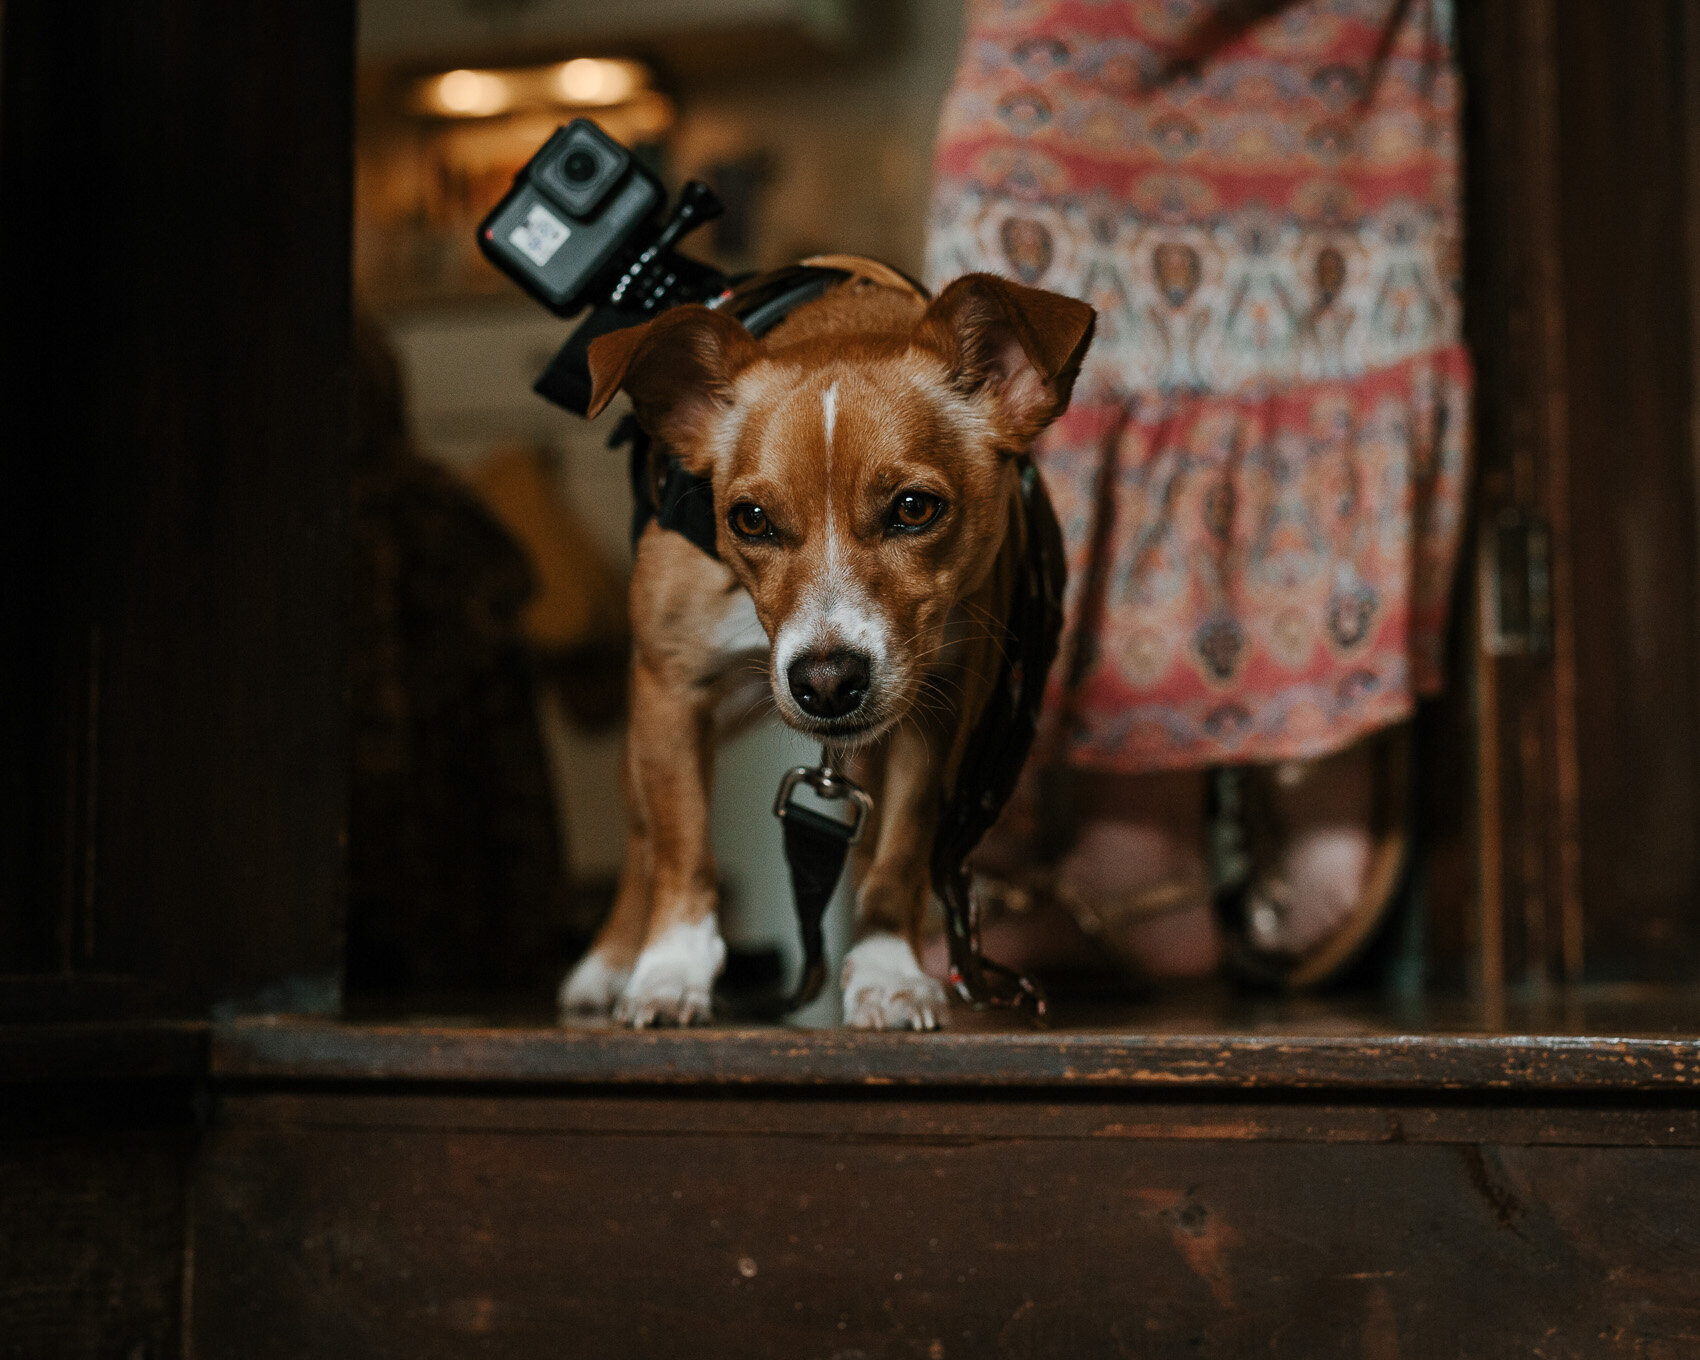 Dog wearing a GoPro ready to record a wedding ceremony